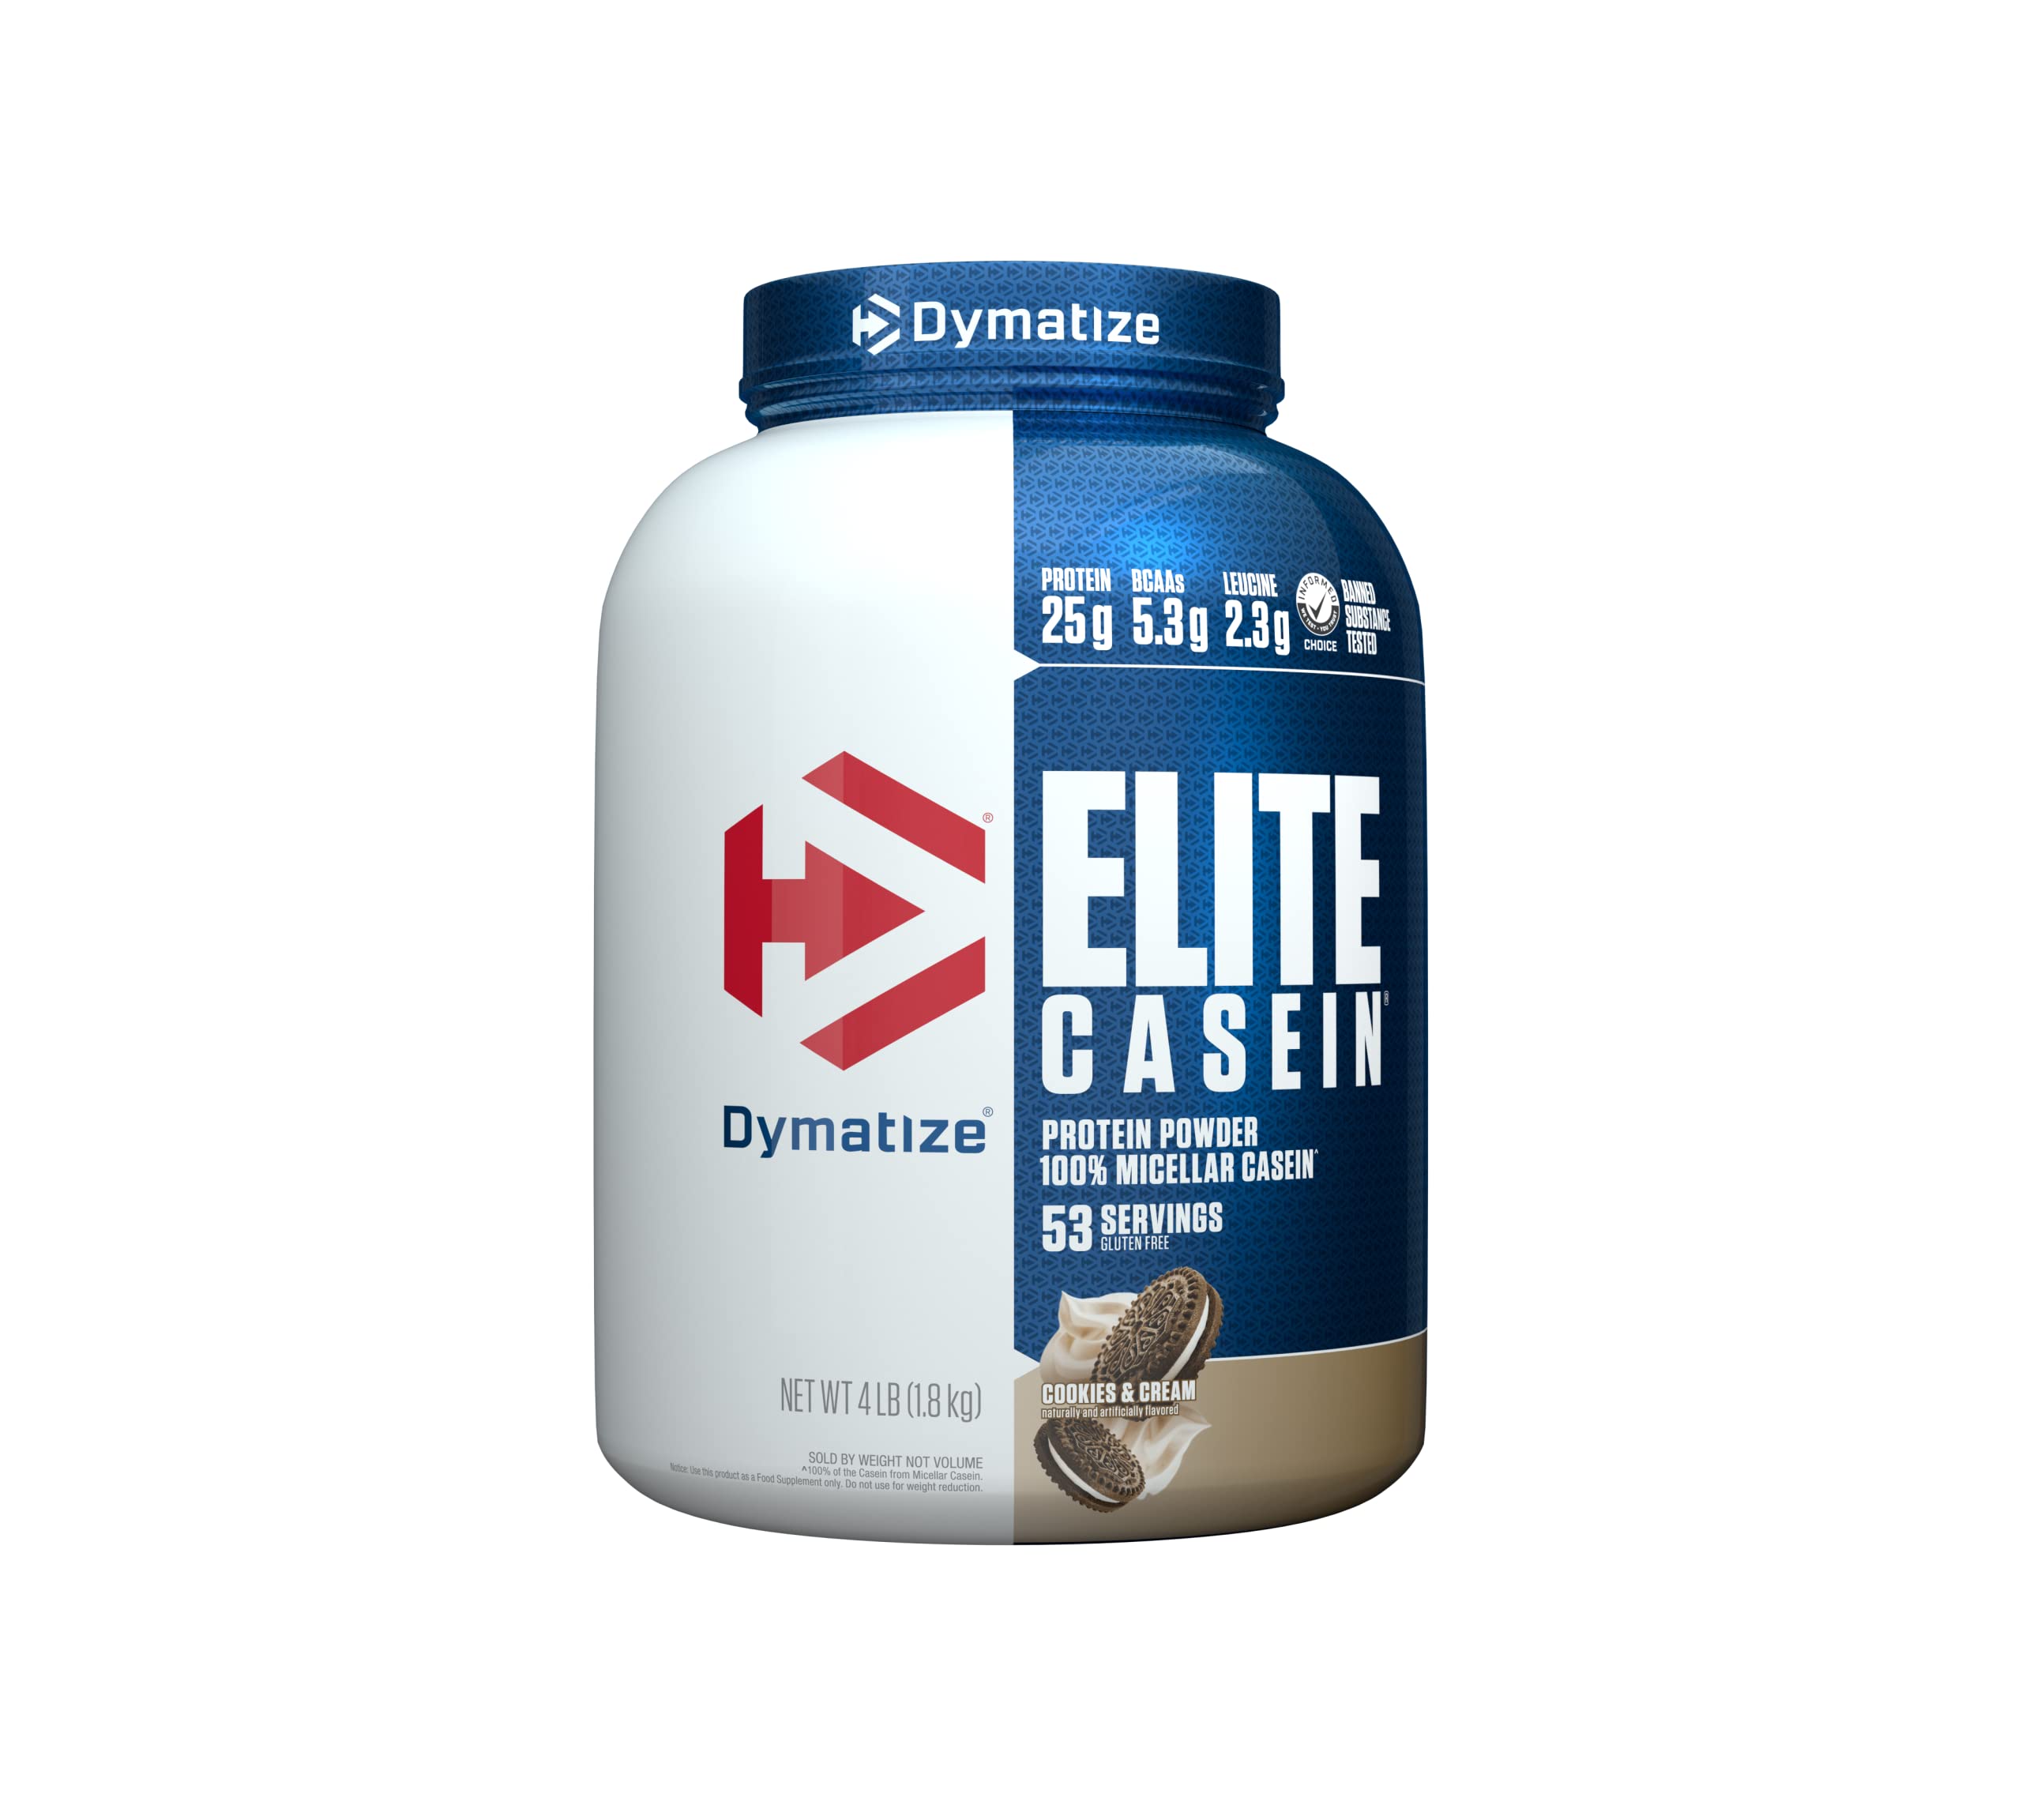 Book Cover Dymatize Elite Casein Protein Powder, Slow Absorbing with Muscle Building Amino Acids, 100% Micellar Casein, 25g Protein, 5.3g BCAAs & 2.3g Leucine, Helps Overnight Recovery, Cookies & Cream, 4 lb Cookies & Cream 53 Servings (Pack of 1)